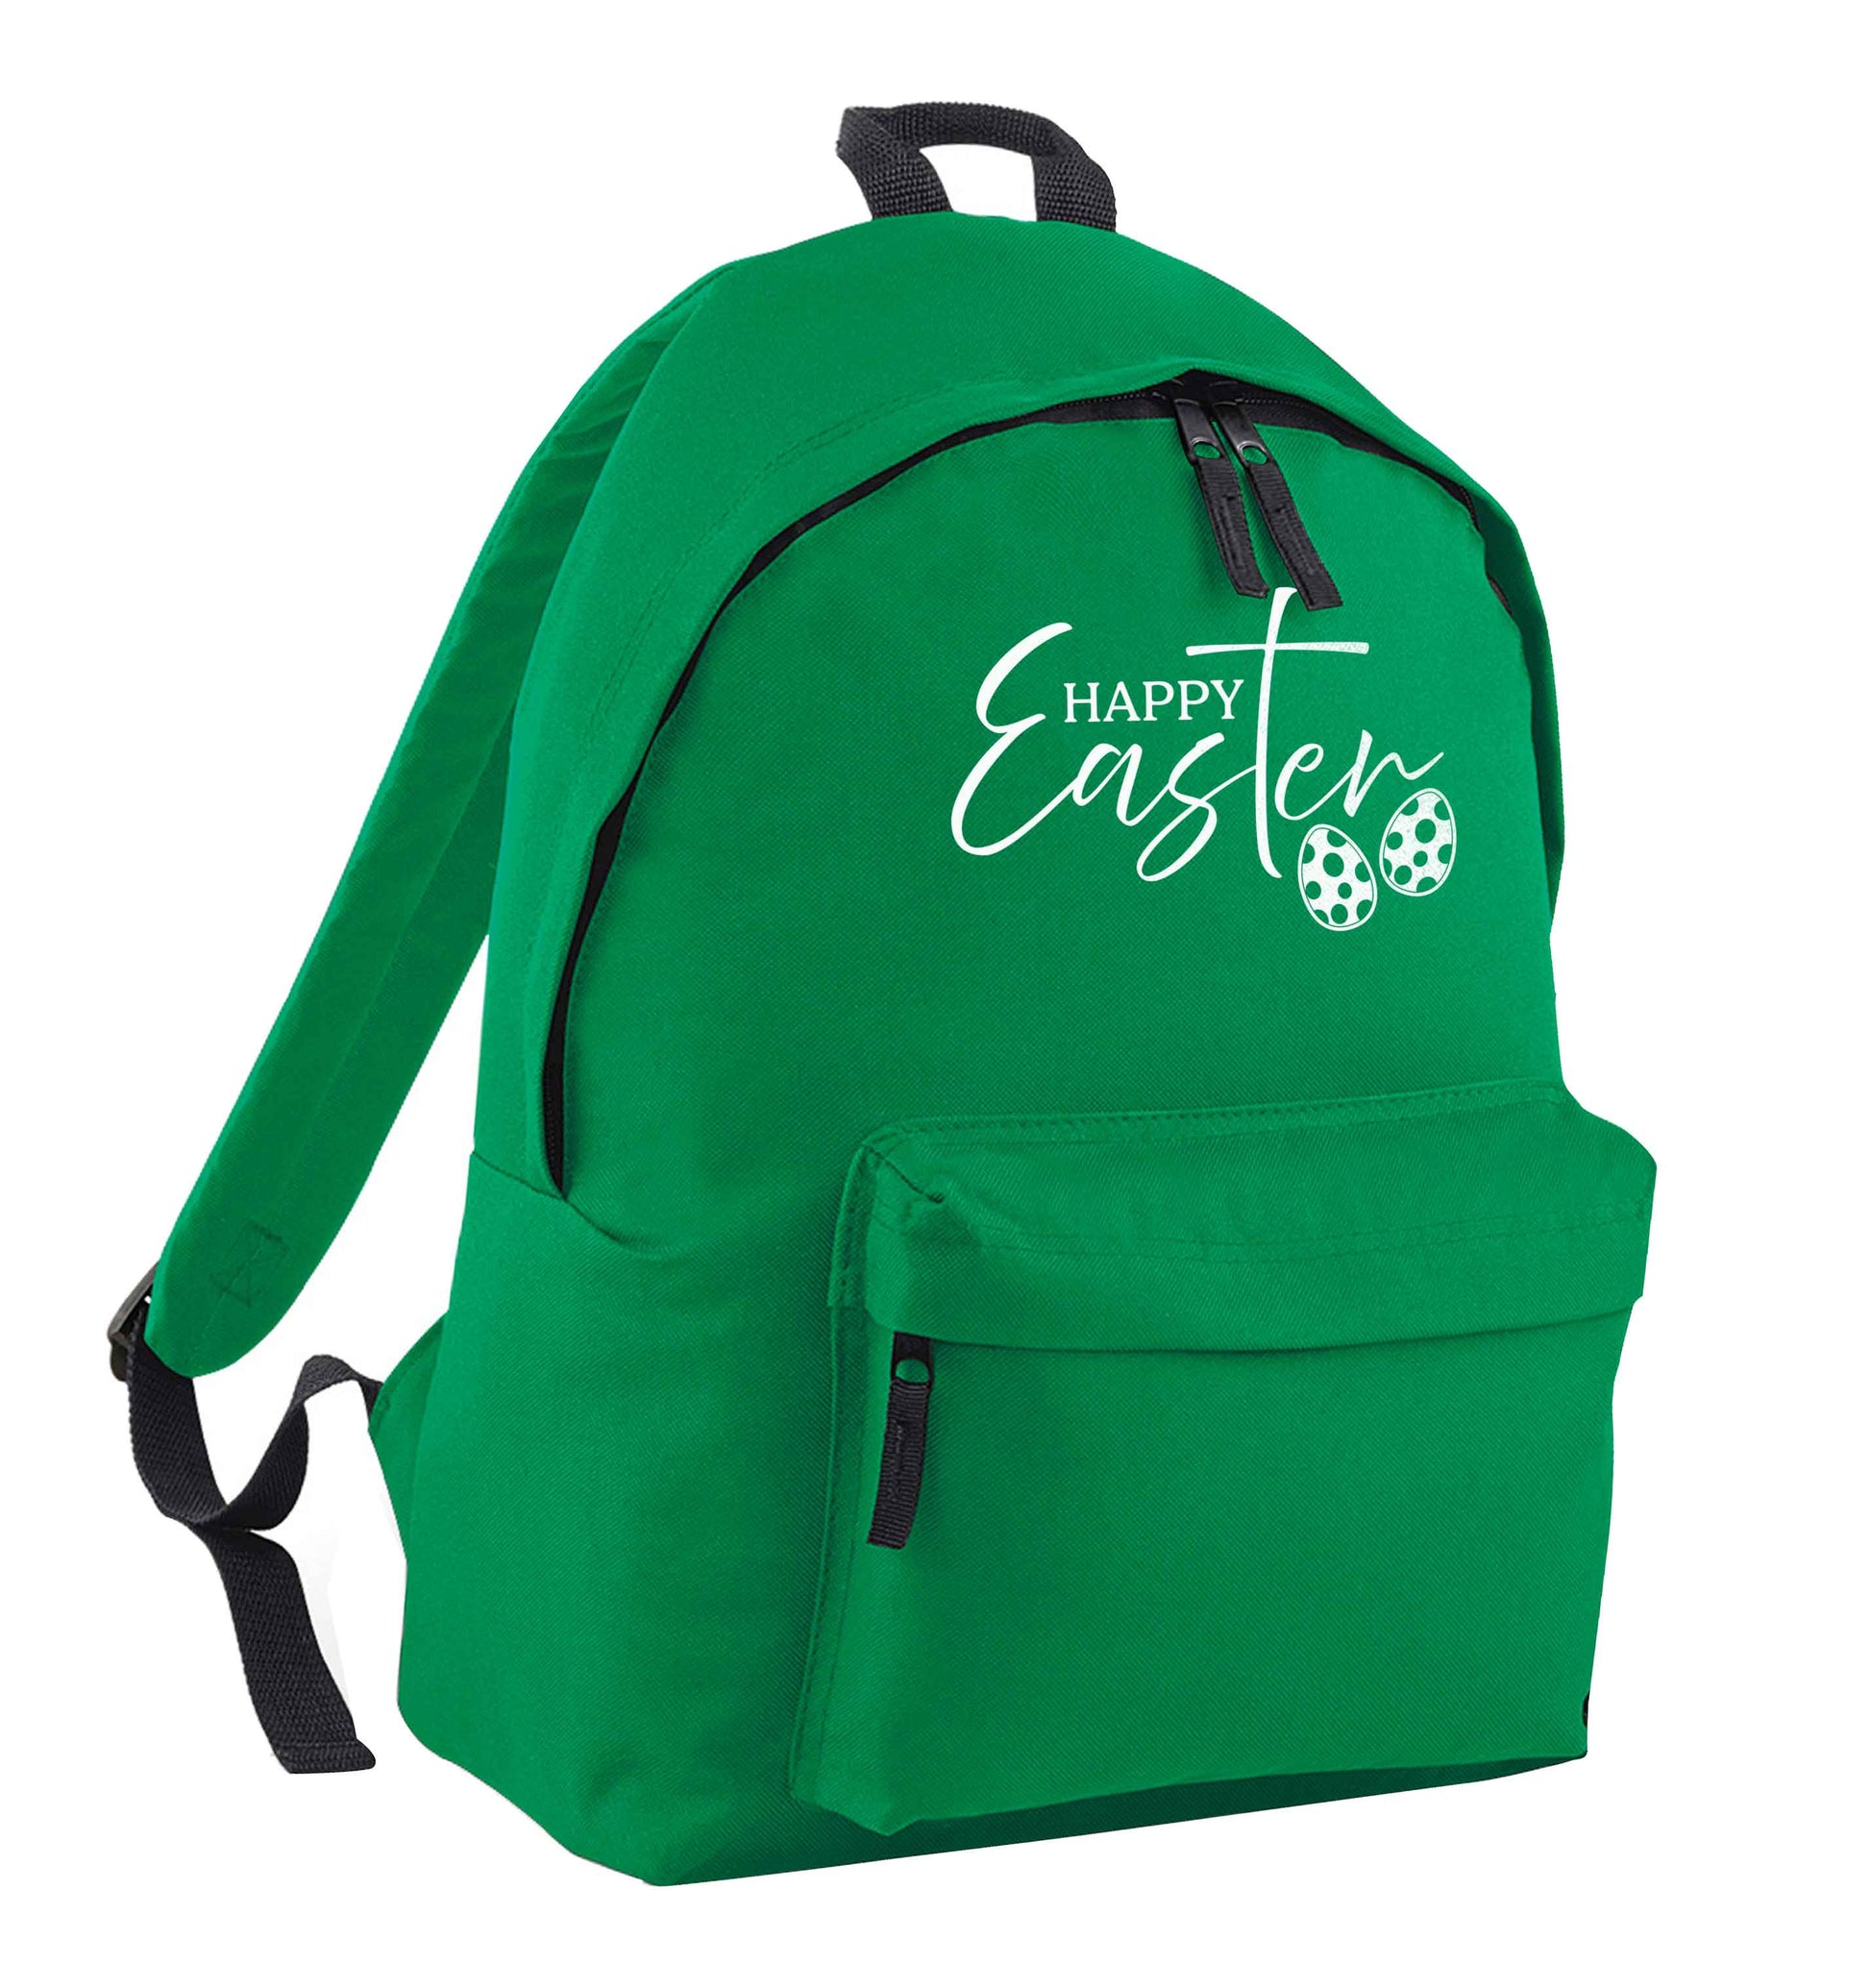 Happy Easter green adults backpack